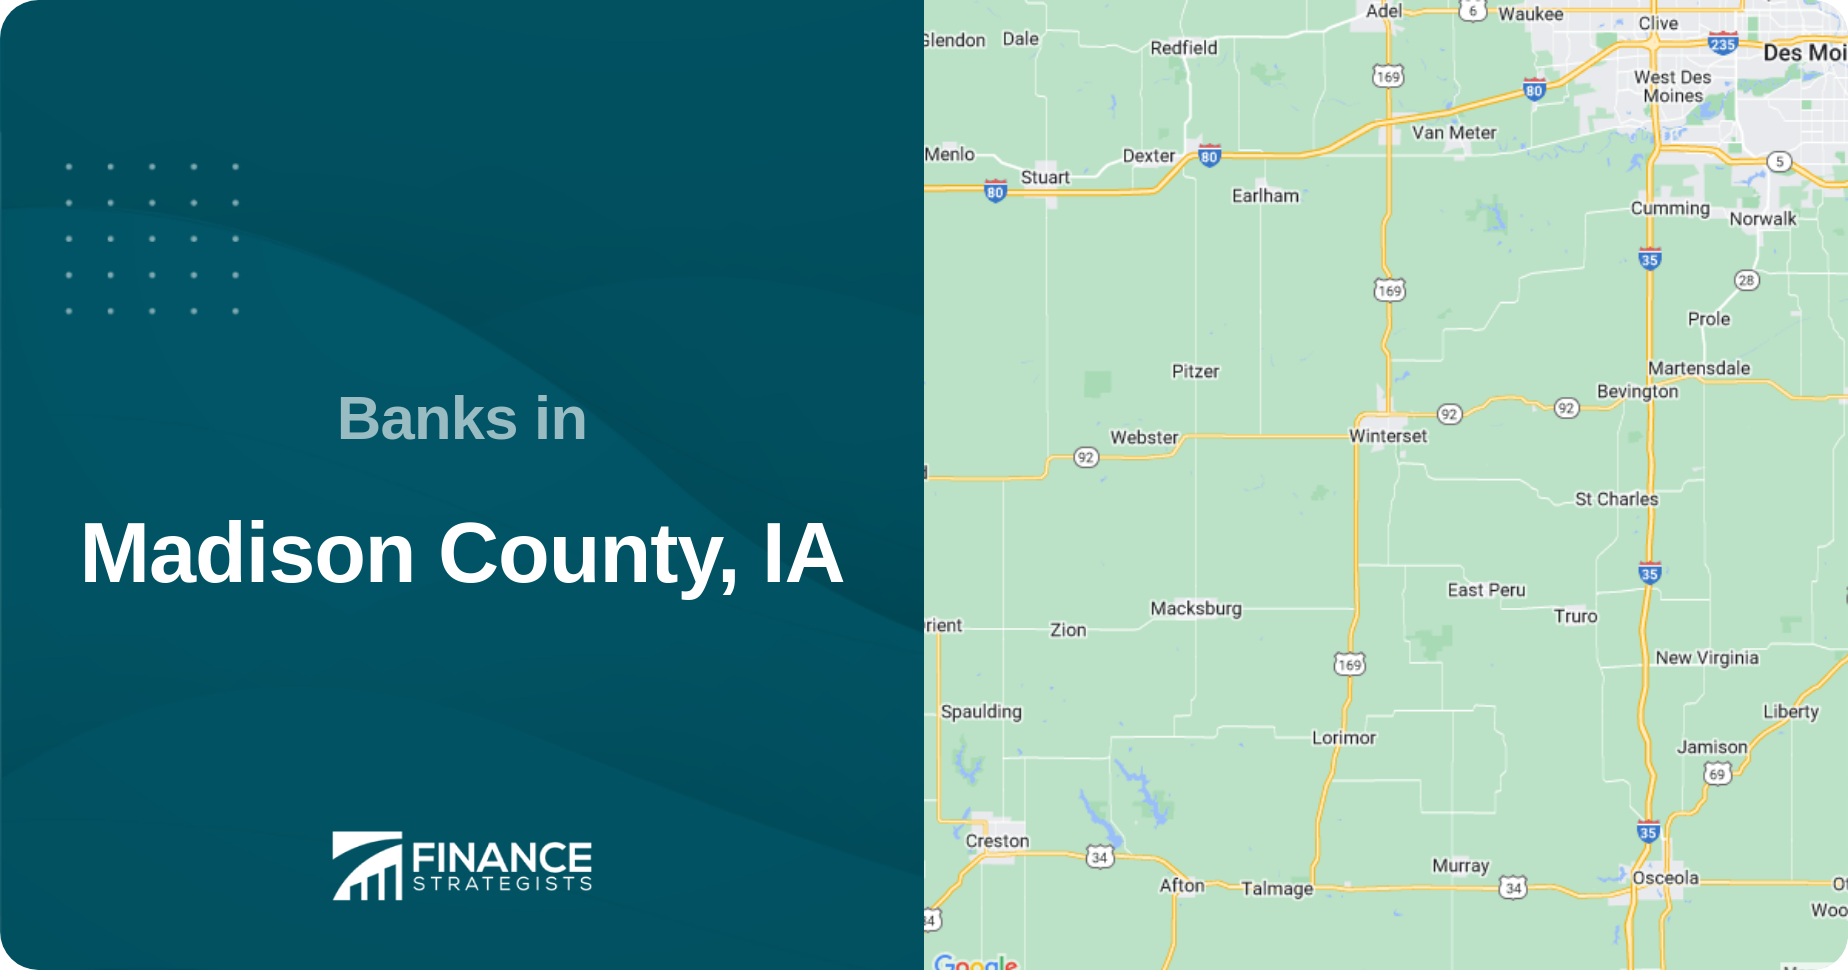 Banks in Madison County, IA